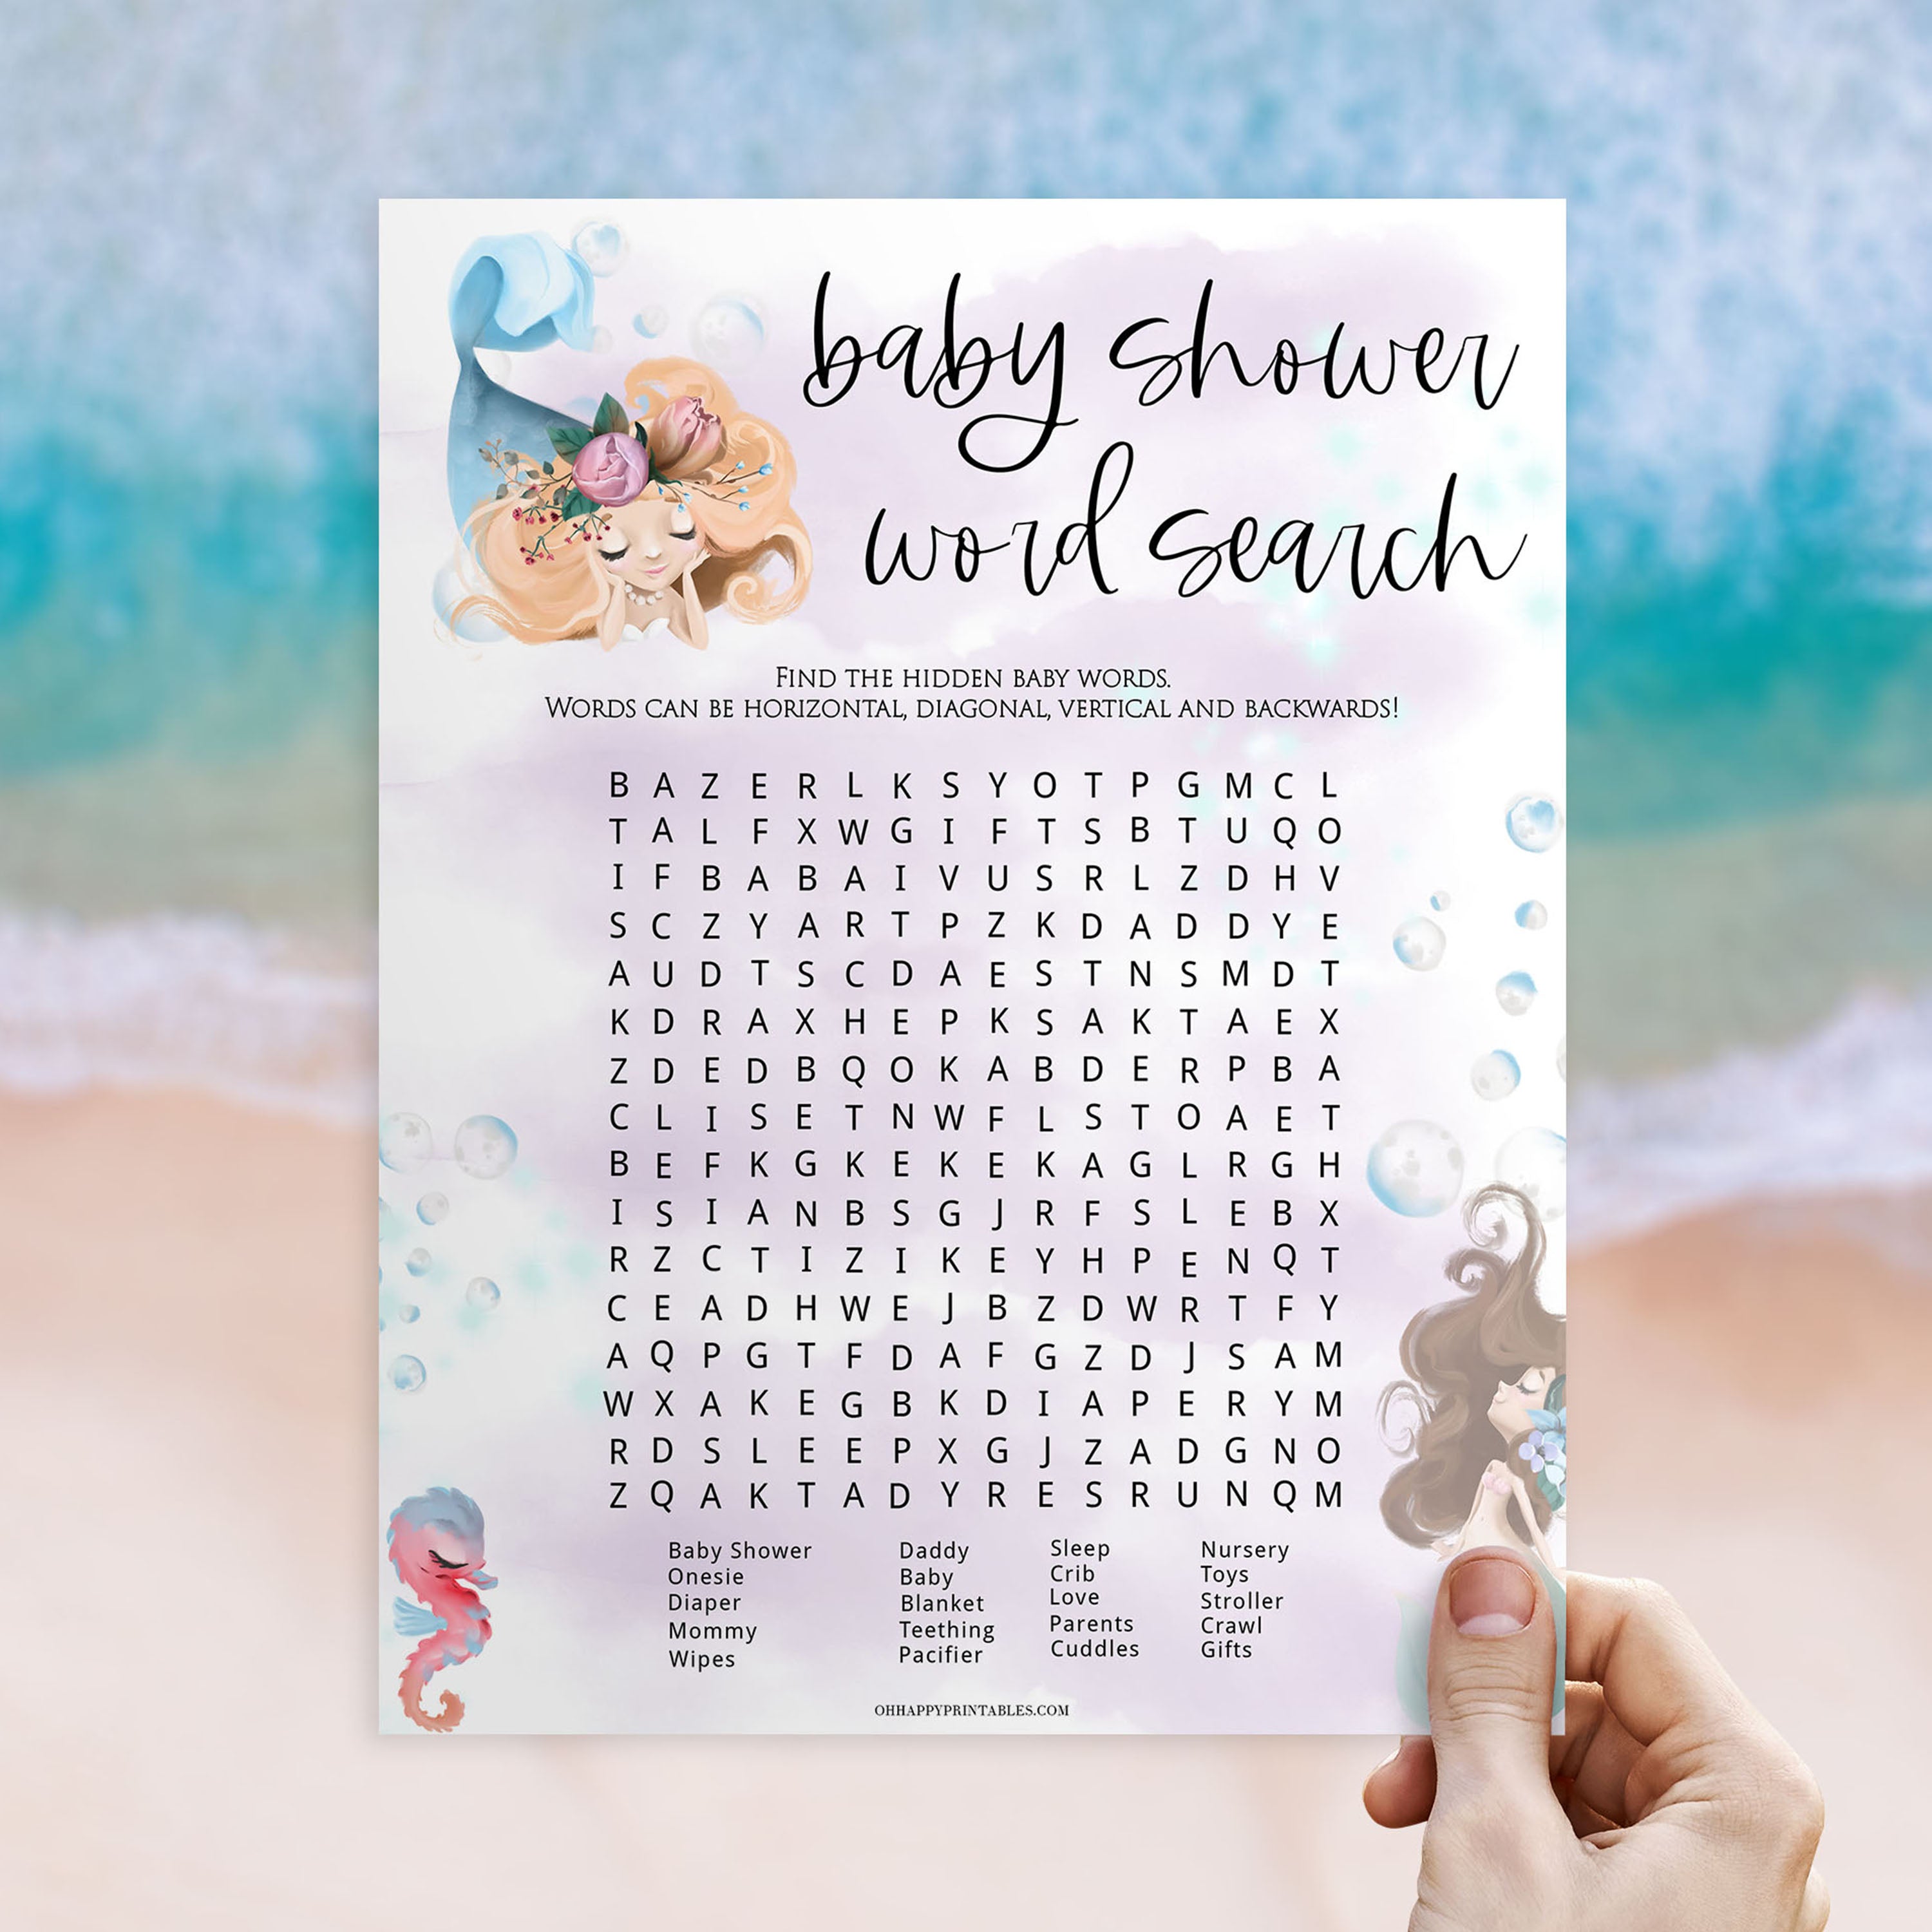 baby shower word search game, Printable baby shower games, little mermaid baby games, baby shower games, fun baby shower ideas, top baby shower ideas, little mermaid baby shower, baby shower games, pink hearts baby shower ideas